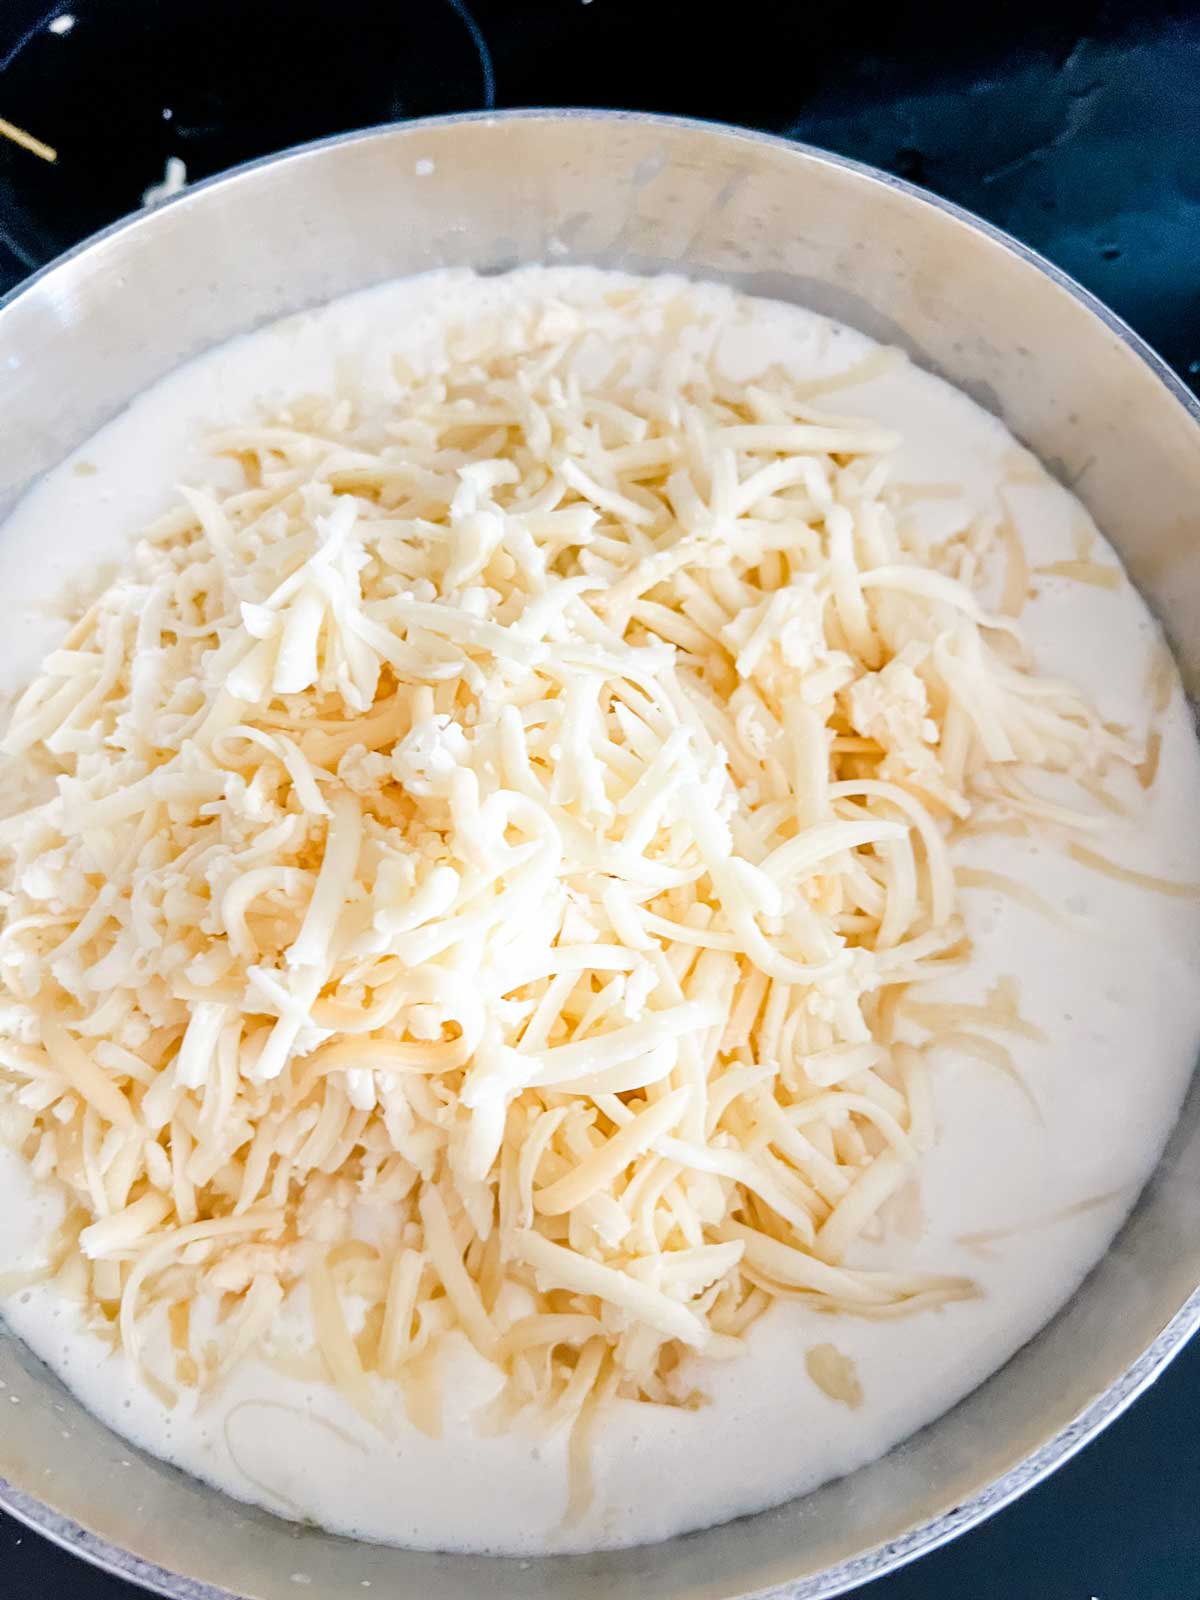 Shredded cheese added to a cream sauce in a saucepan.